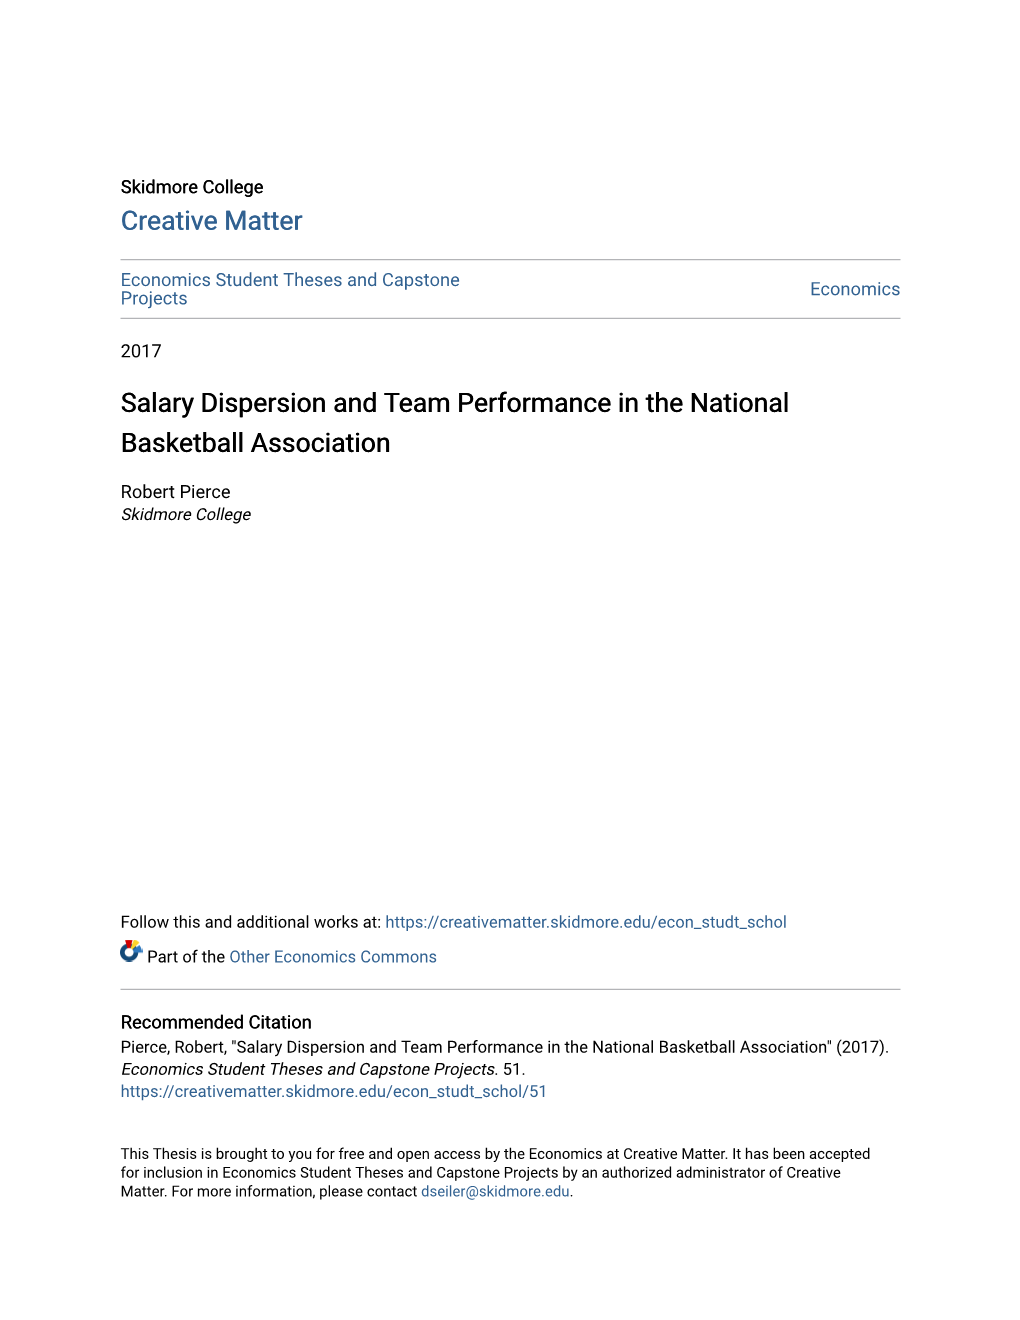 Salary Dispersion and Team Performance in the National Basketball Association